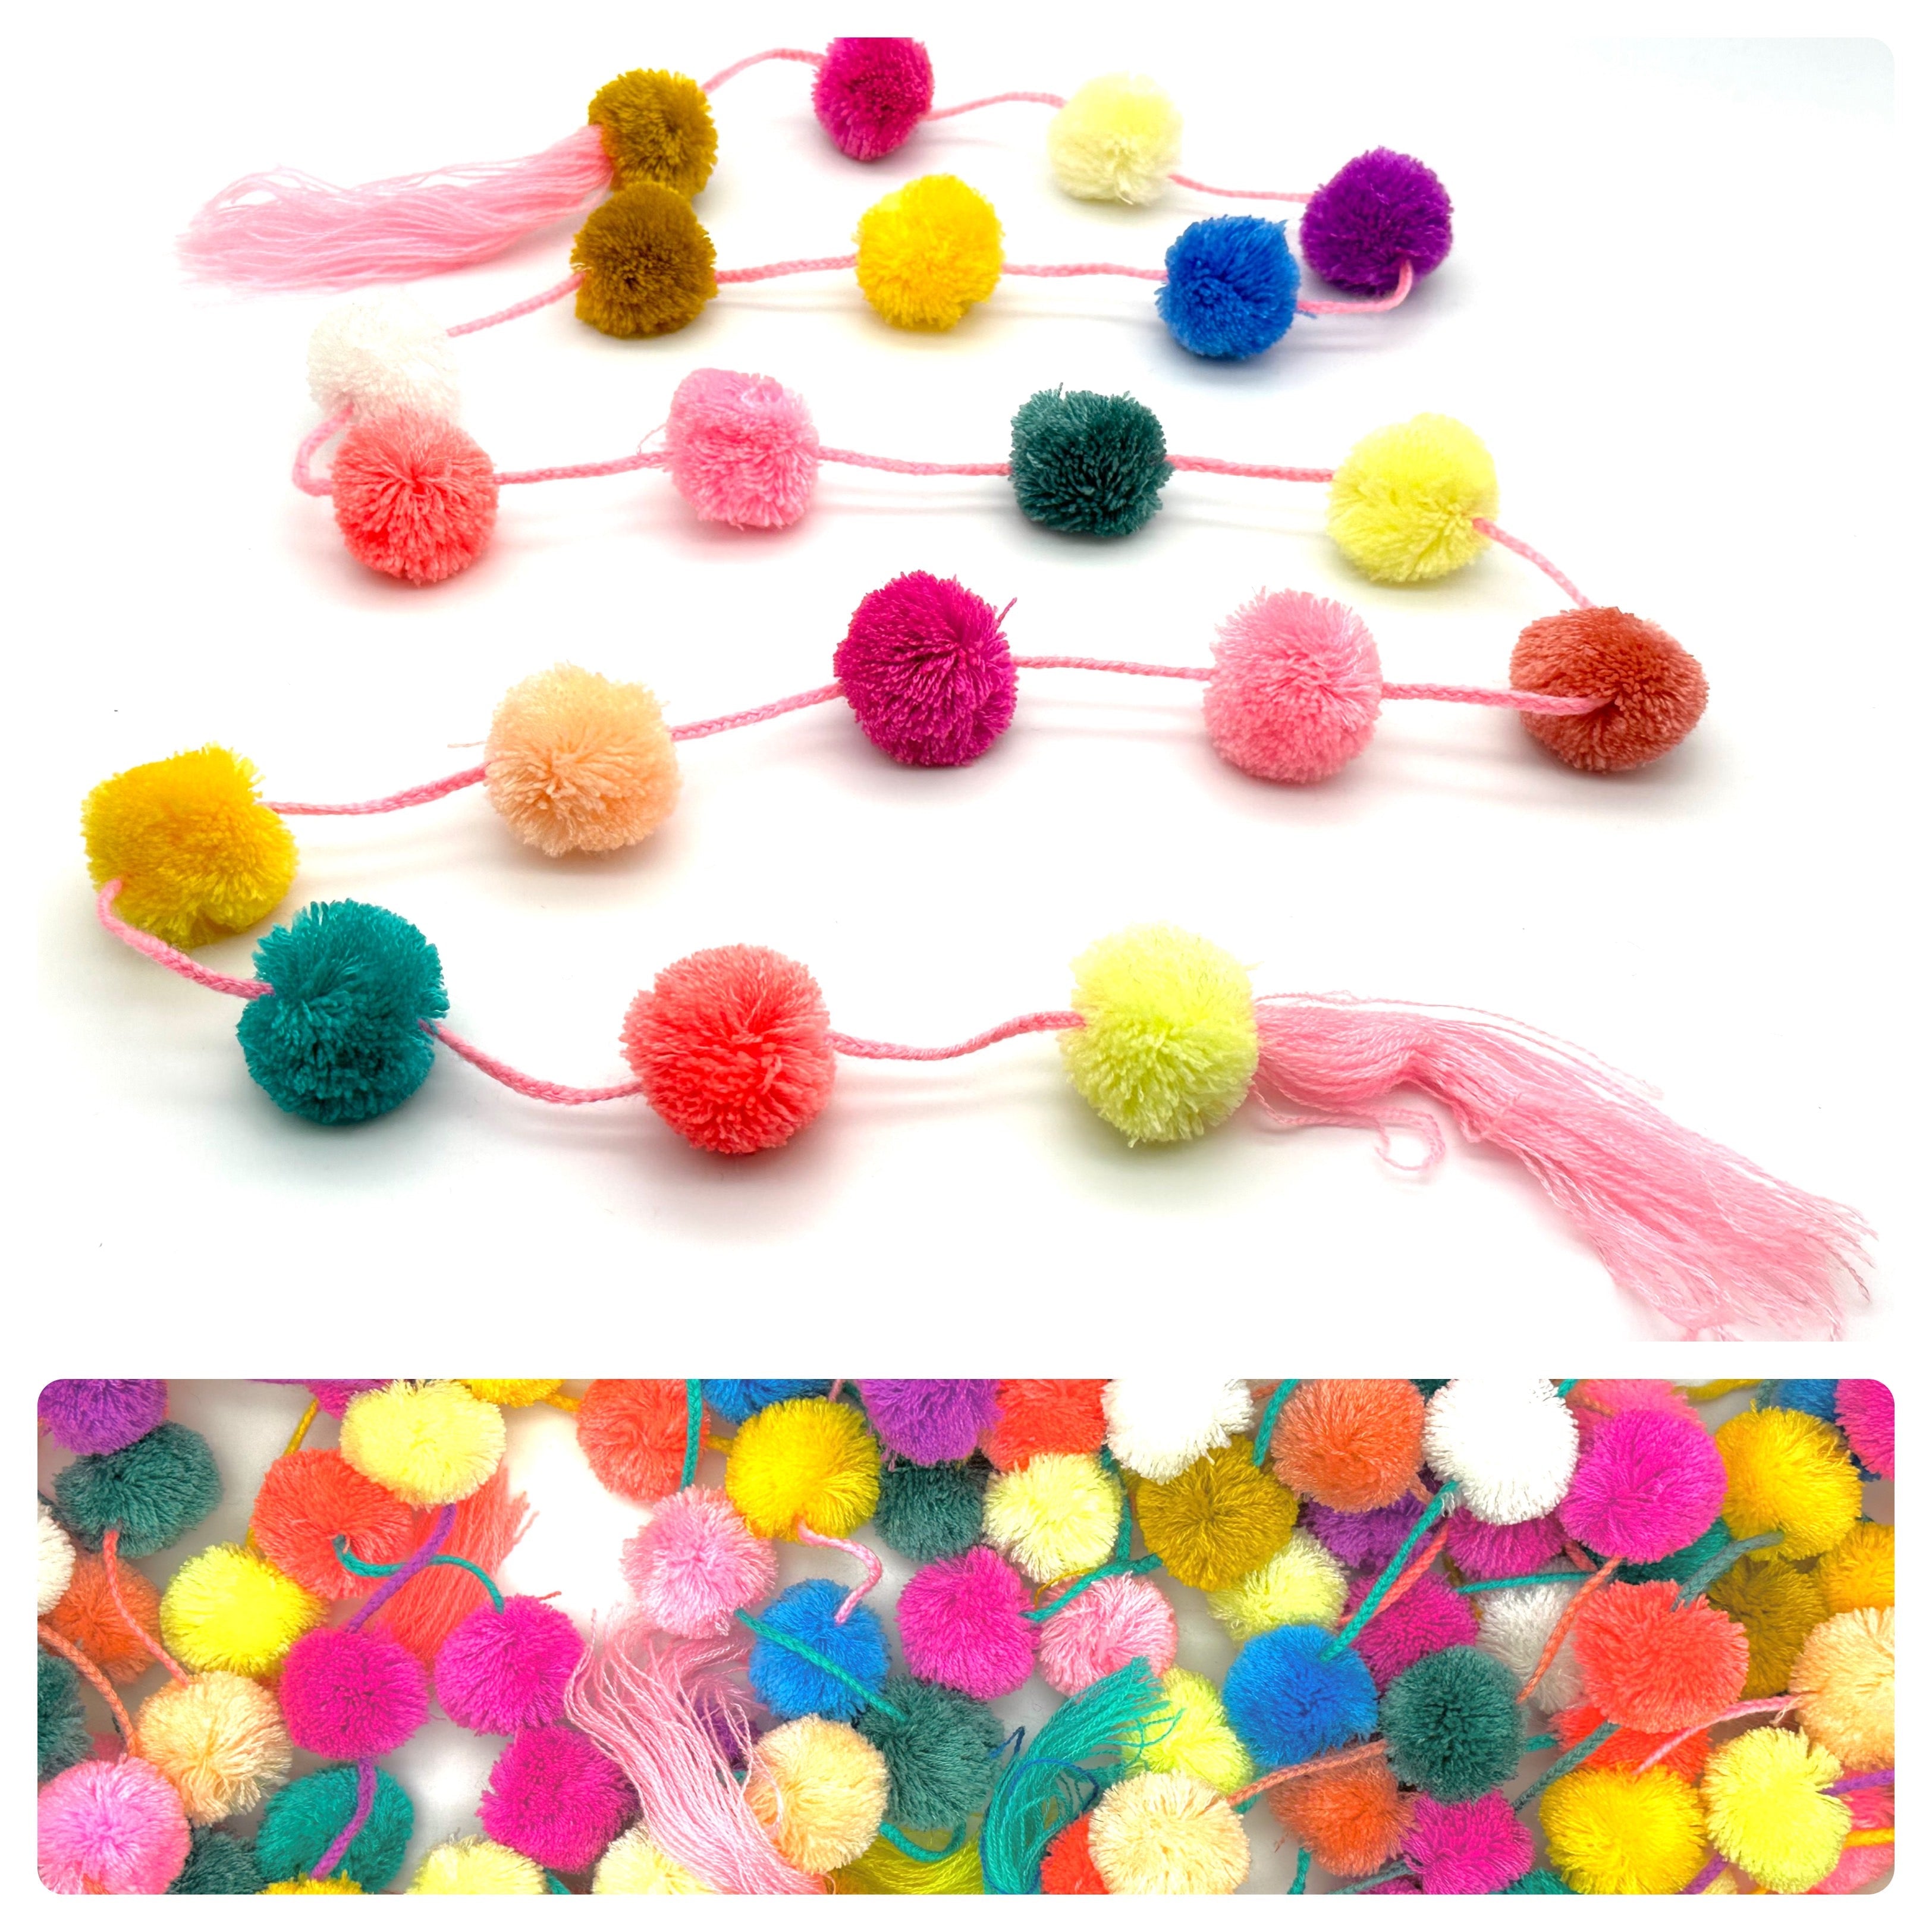 1 x 150cm Mixed Pastel Colour Handmade Mexican Pompom String Garland with 20 Pom Poms